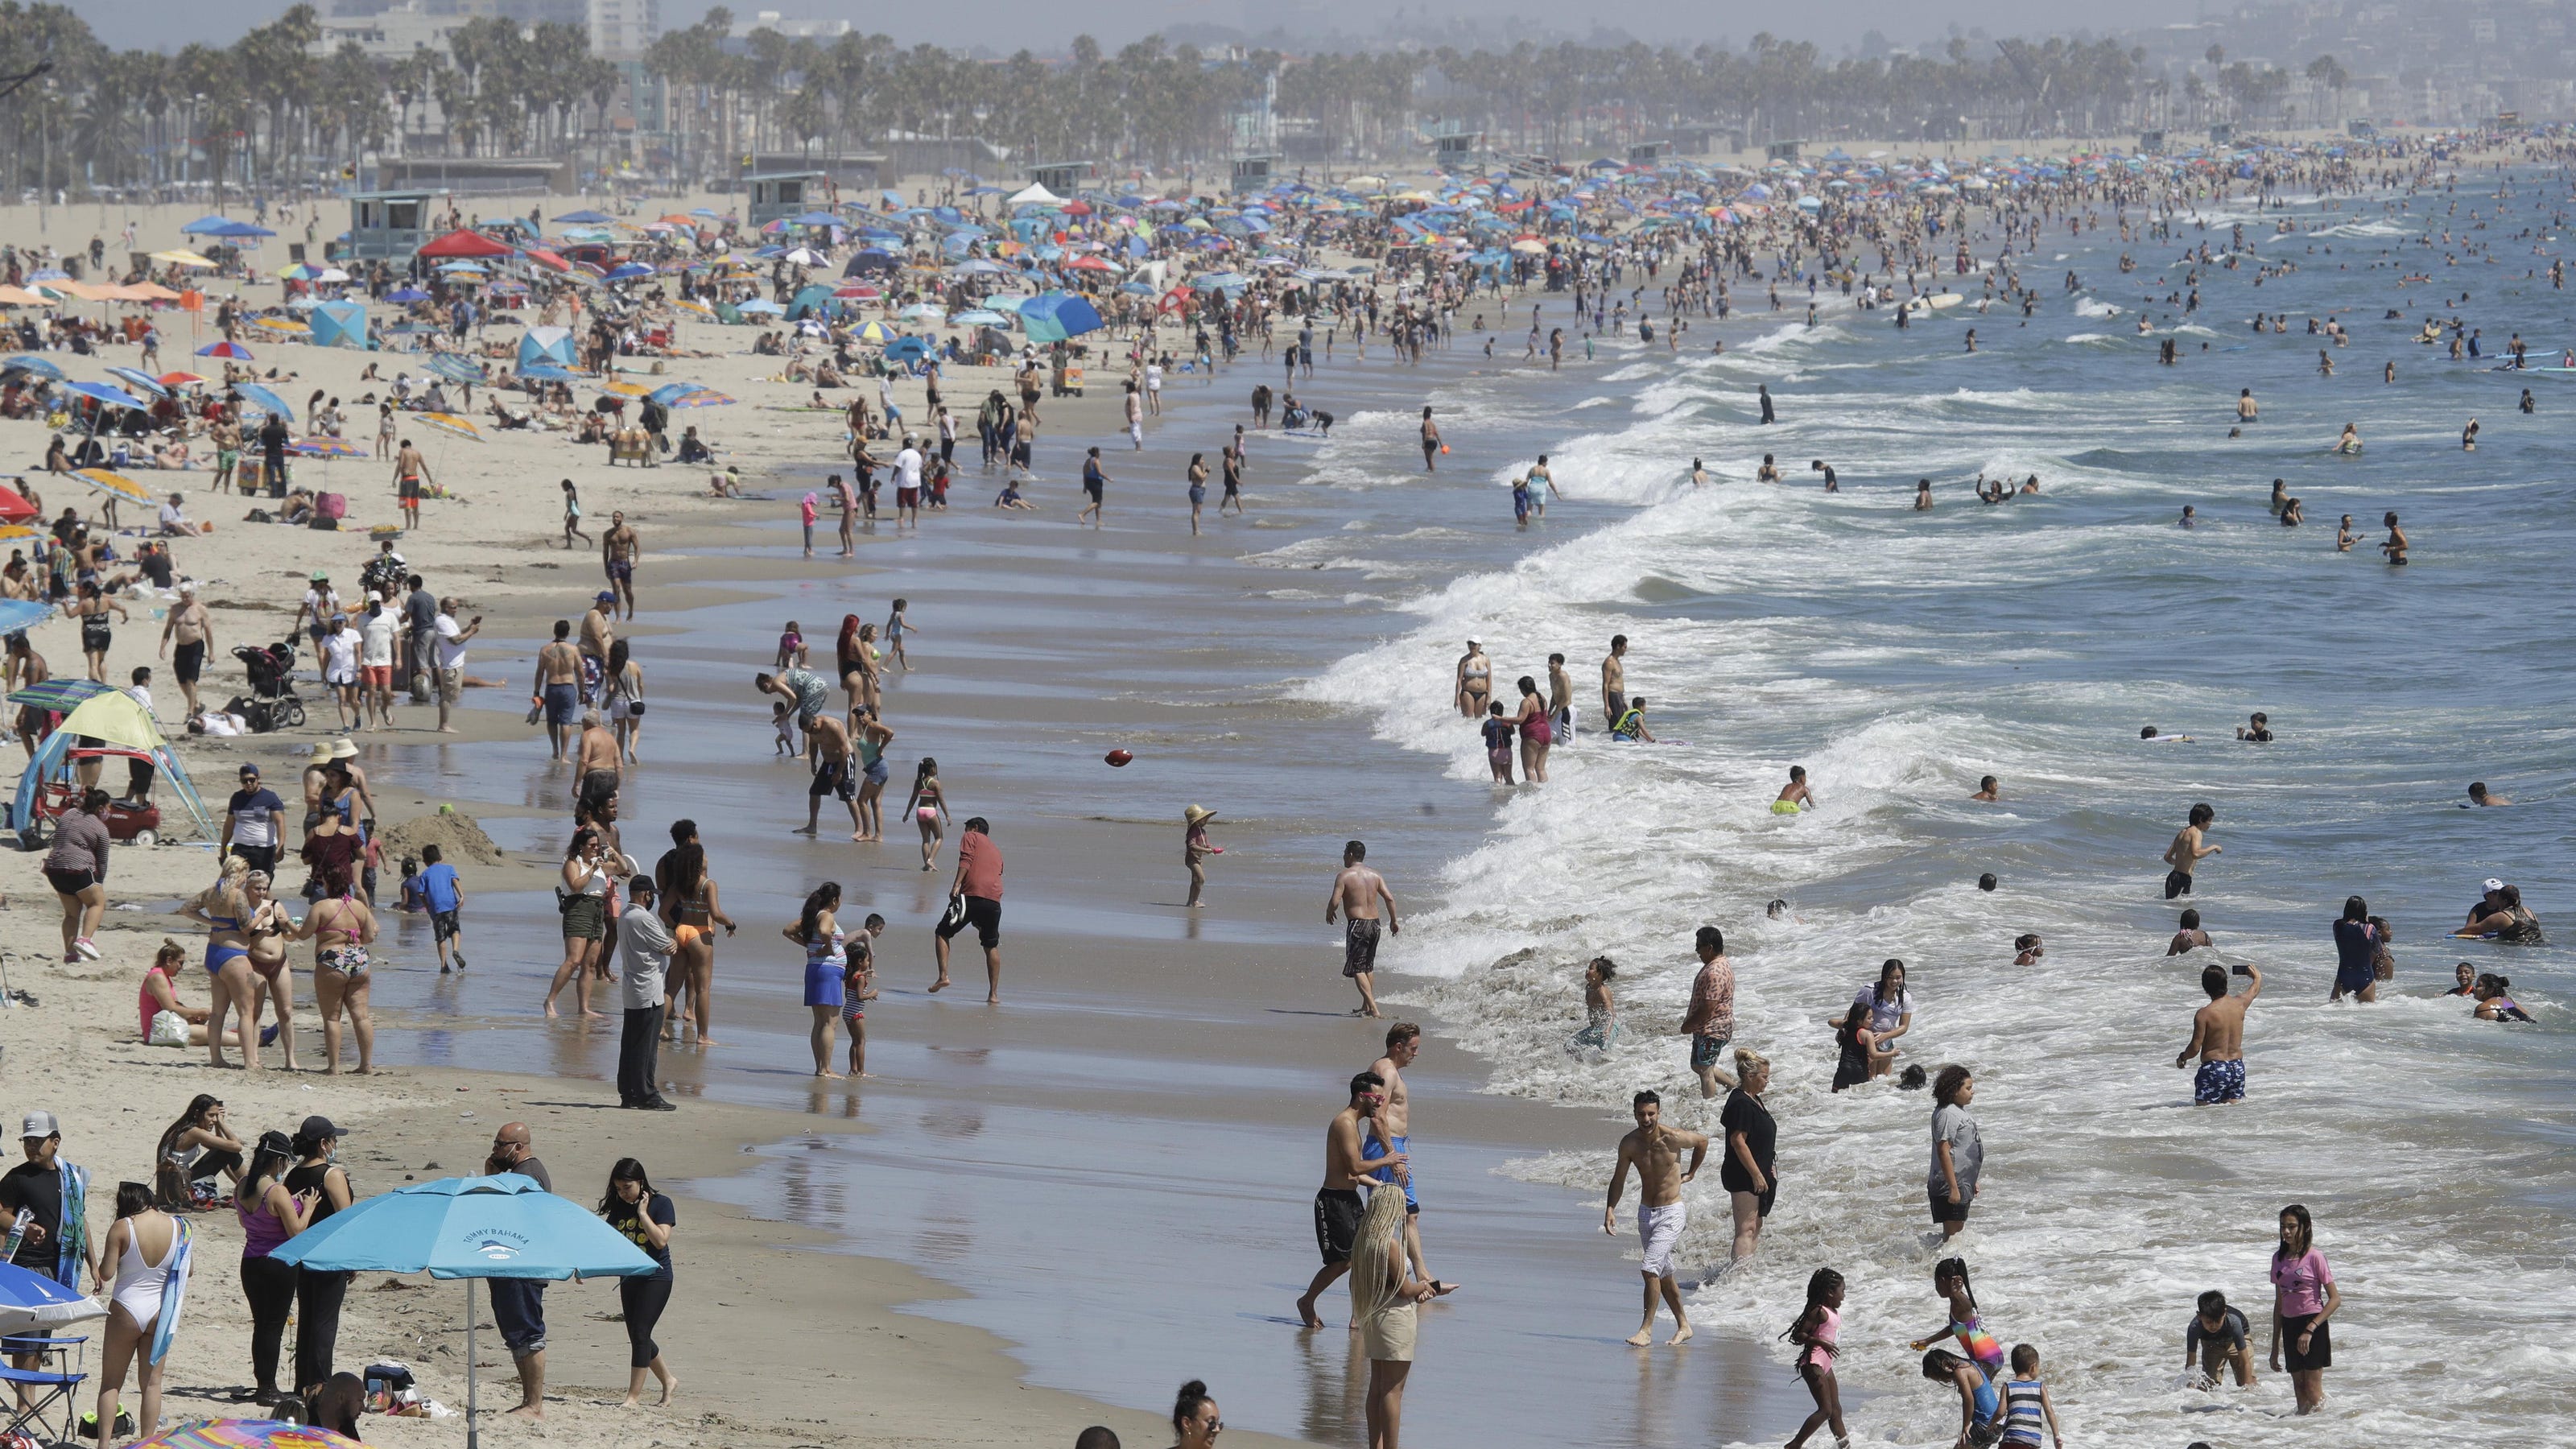 California population declines, fueled by COVID, falling birth rate